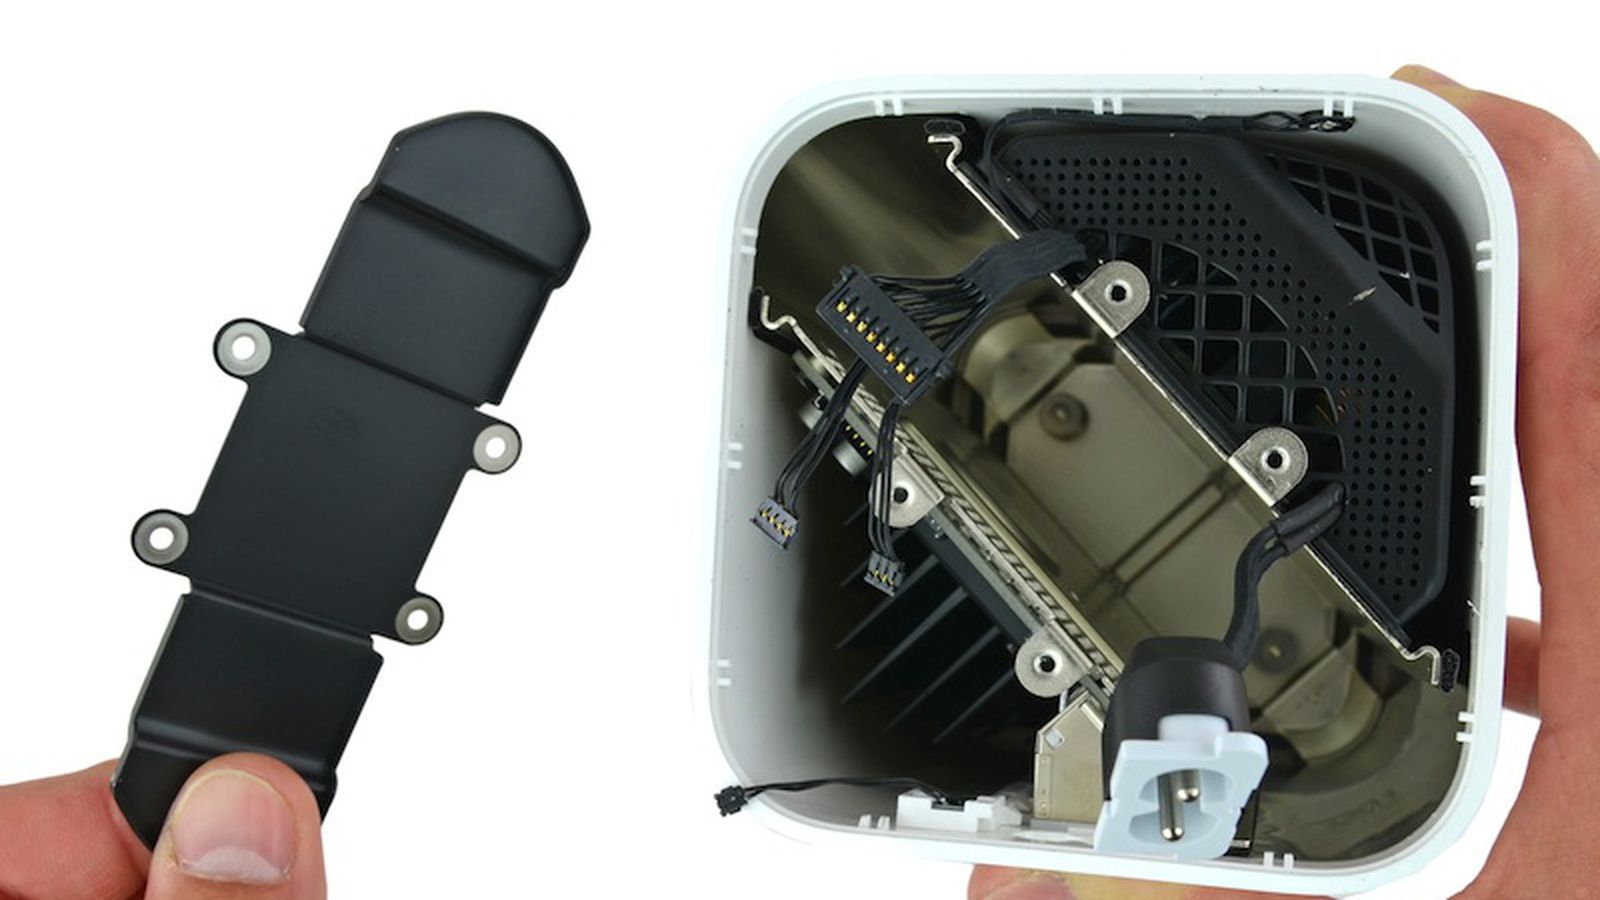 Teardown of Apple's New AirPort Extreme Hard Drive Slot, but Connectors